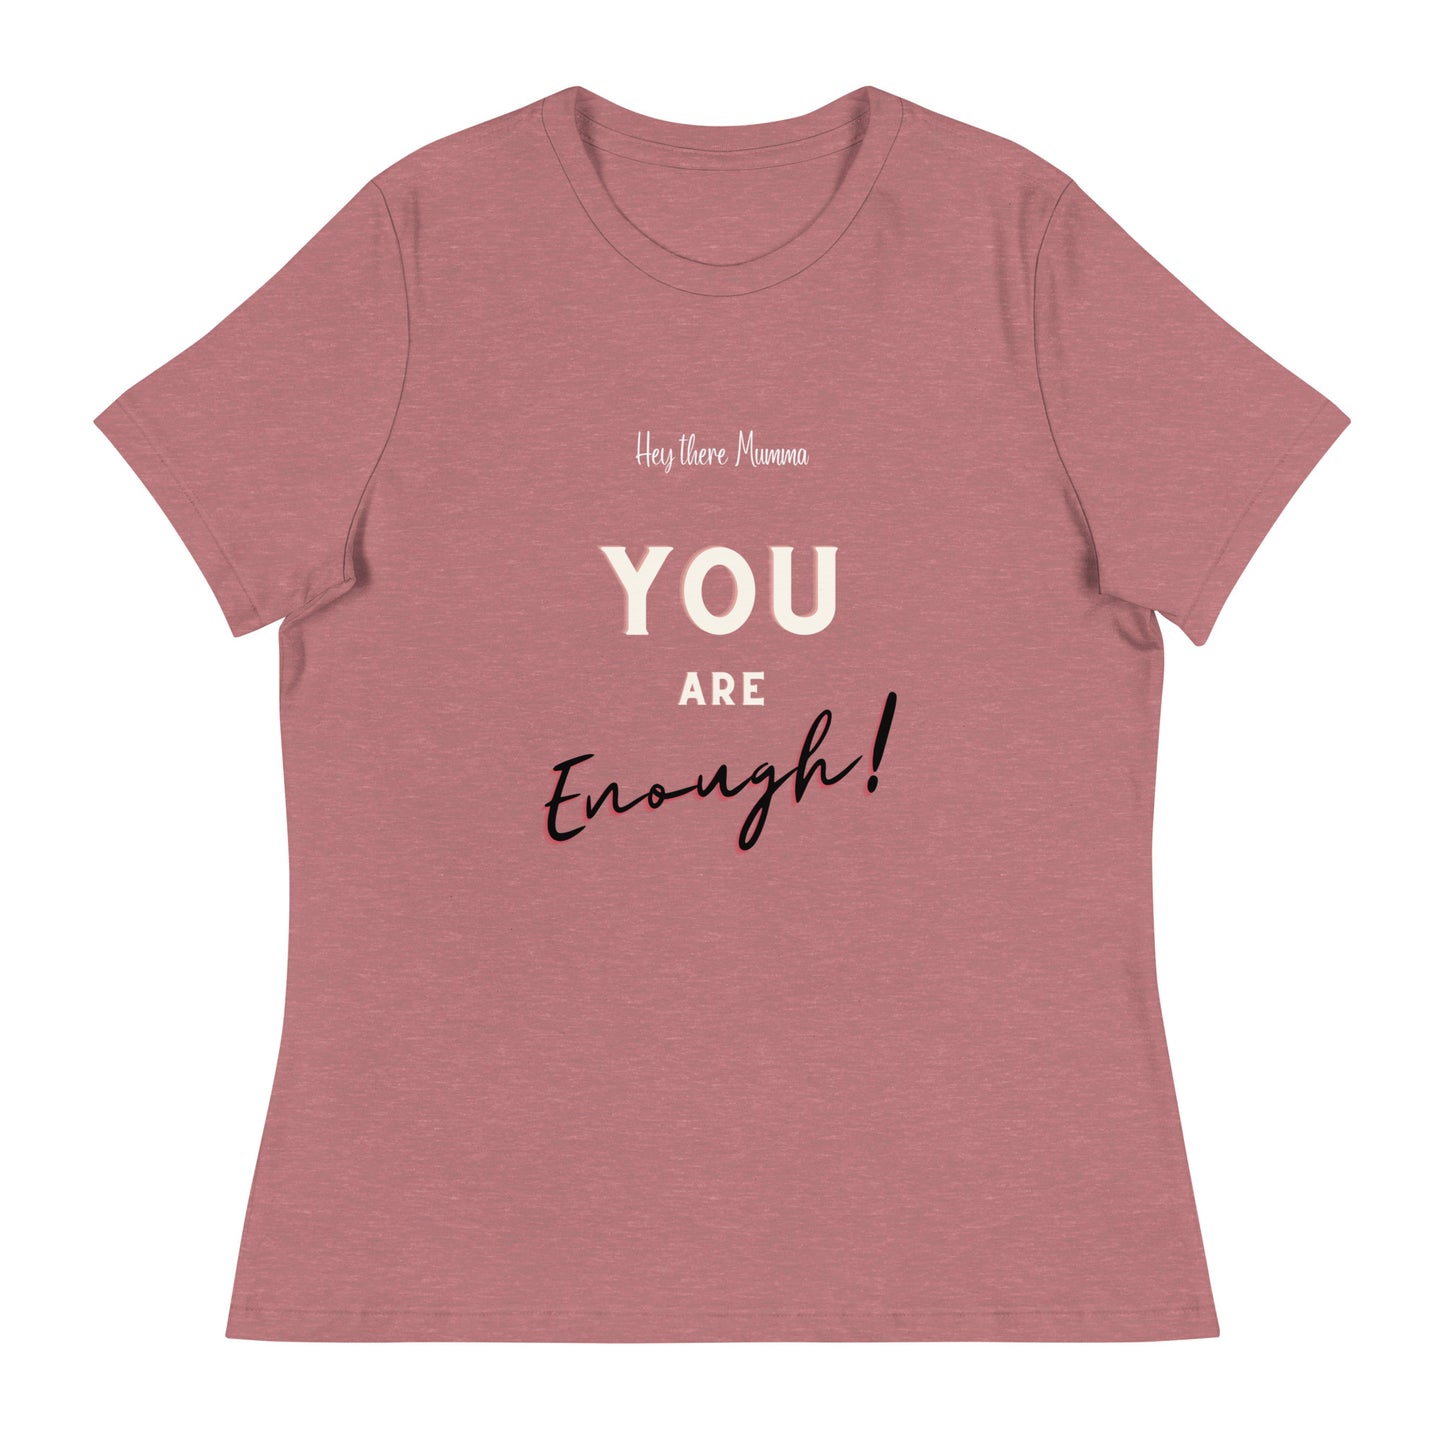 You are enough! T-shirt